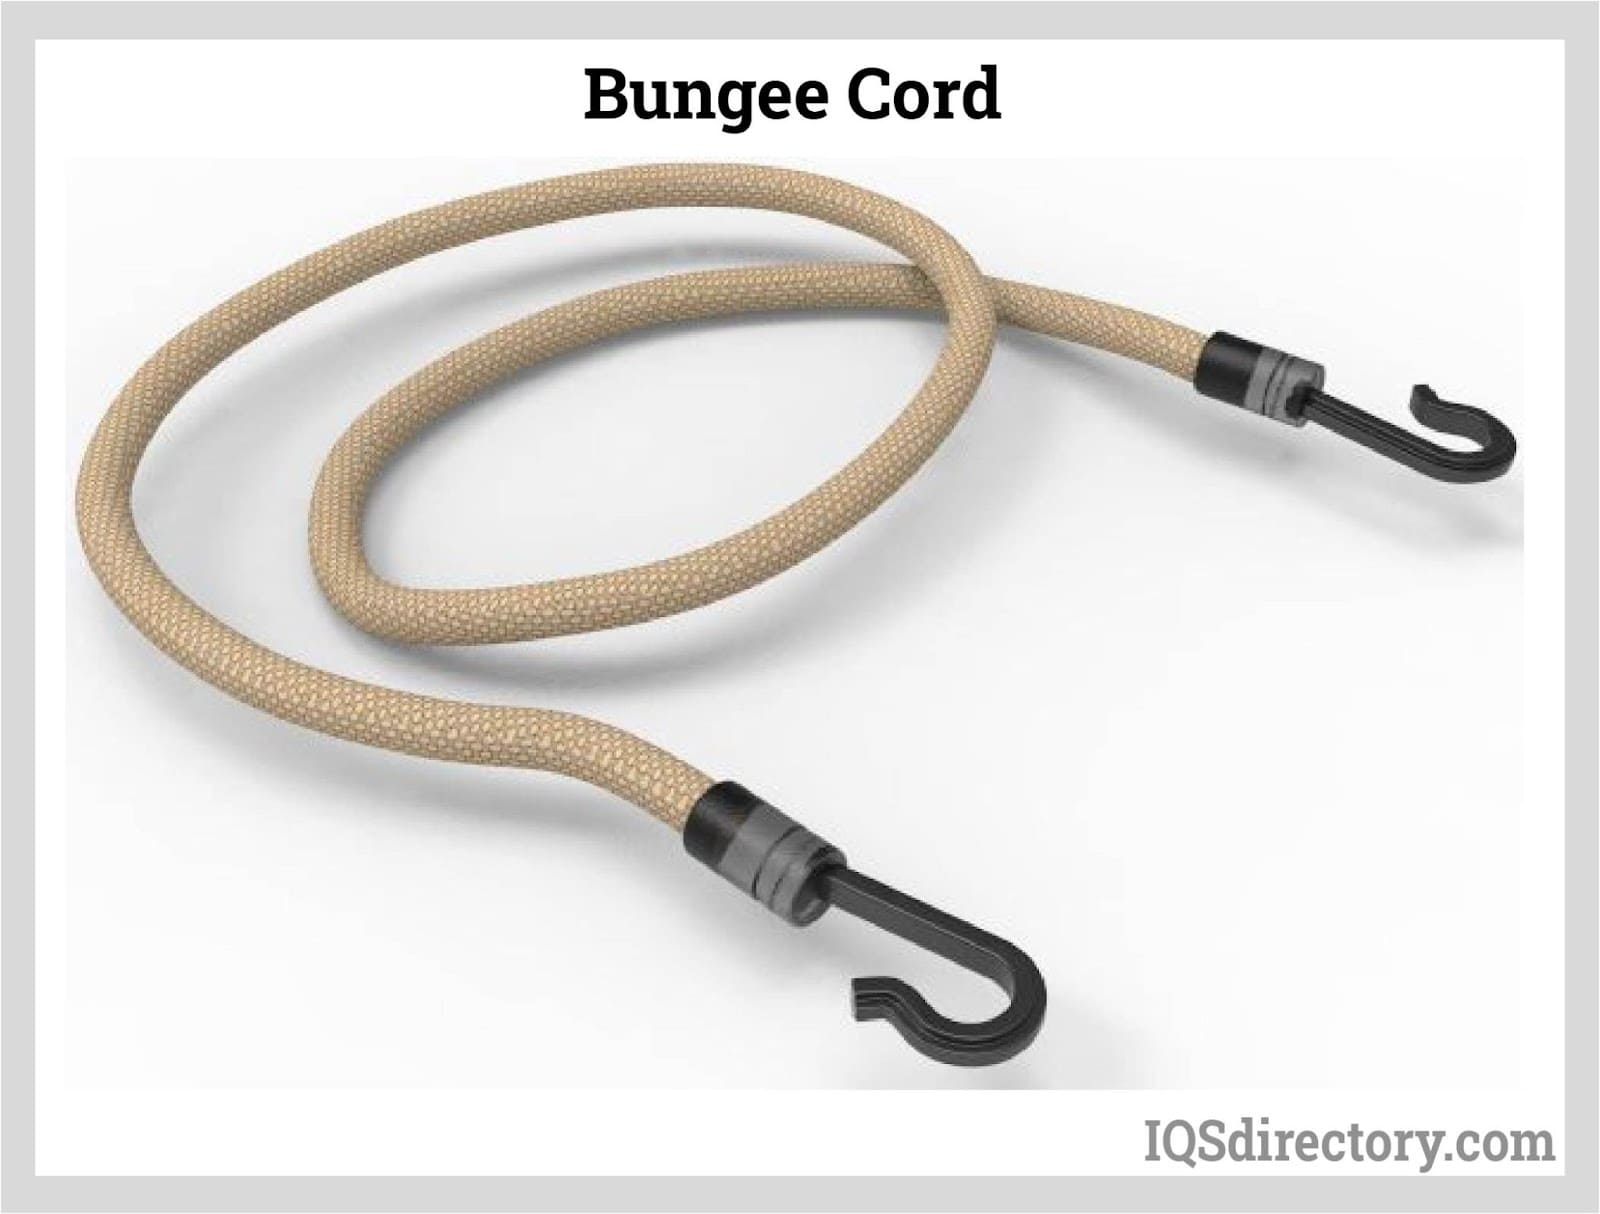 Shock, Bungee, and Elastic Cord: Types, Design, Uses, and Benefits